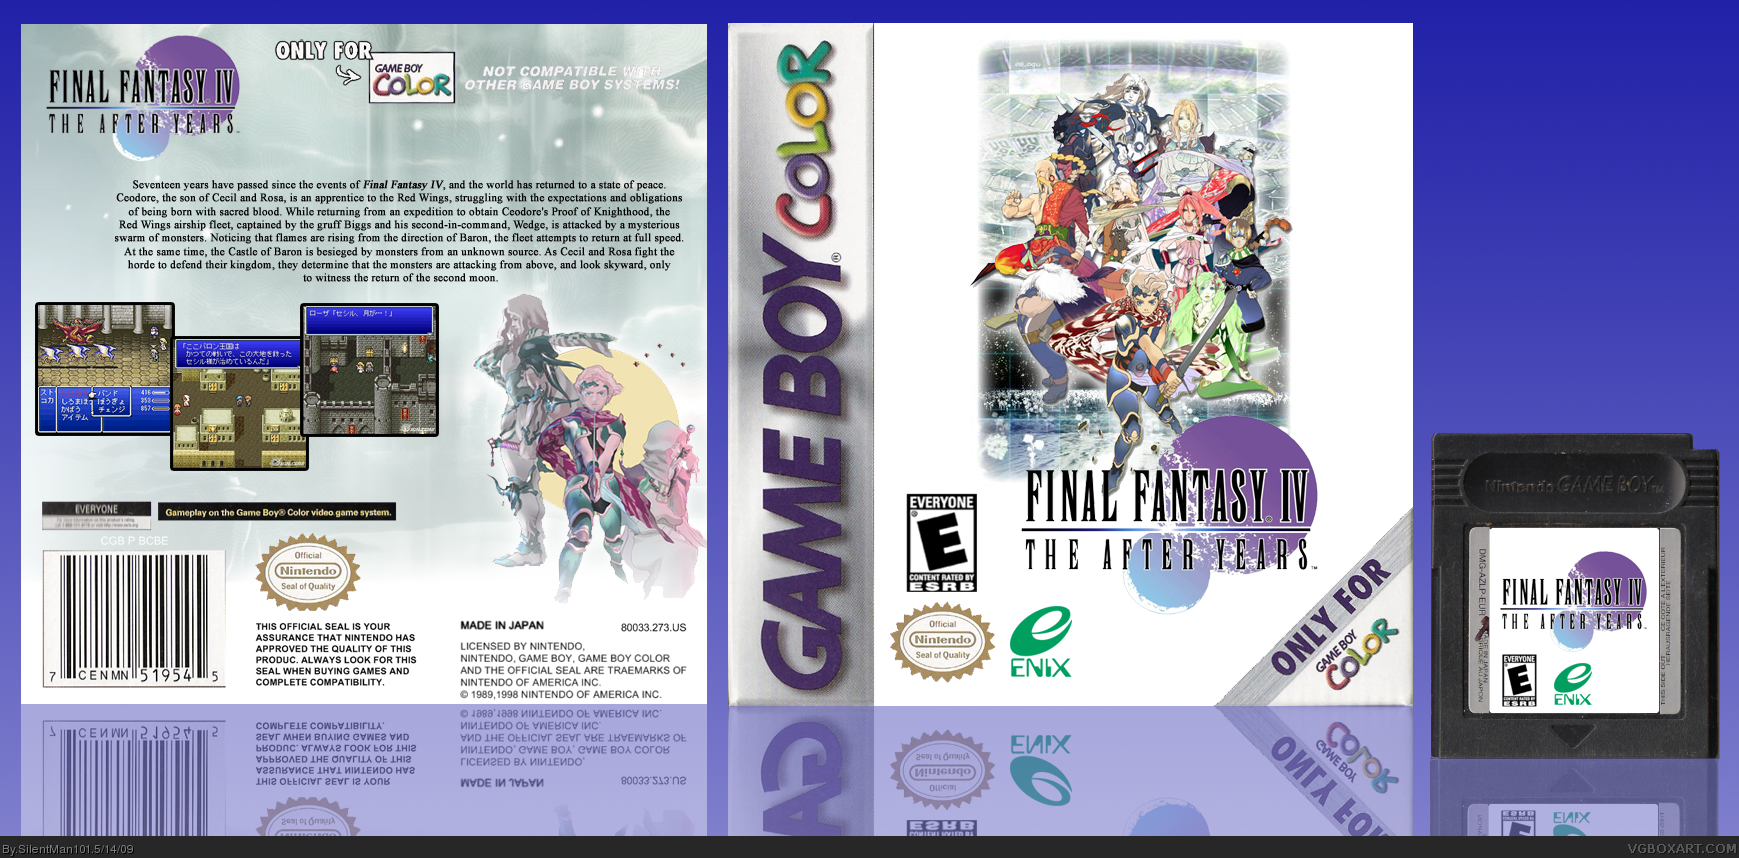 Final Fantasy IV: The After Years box cover